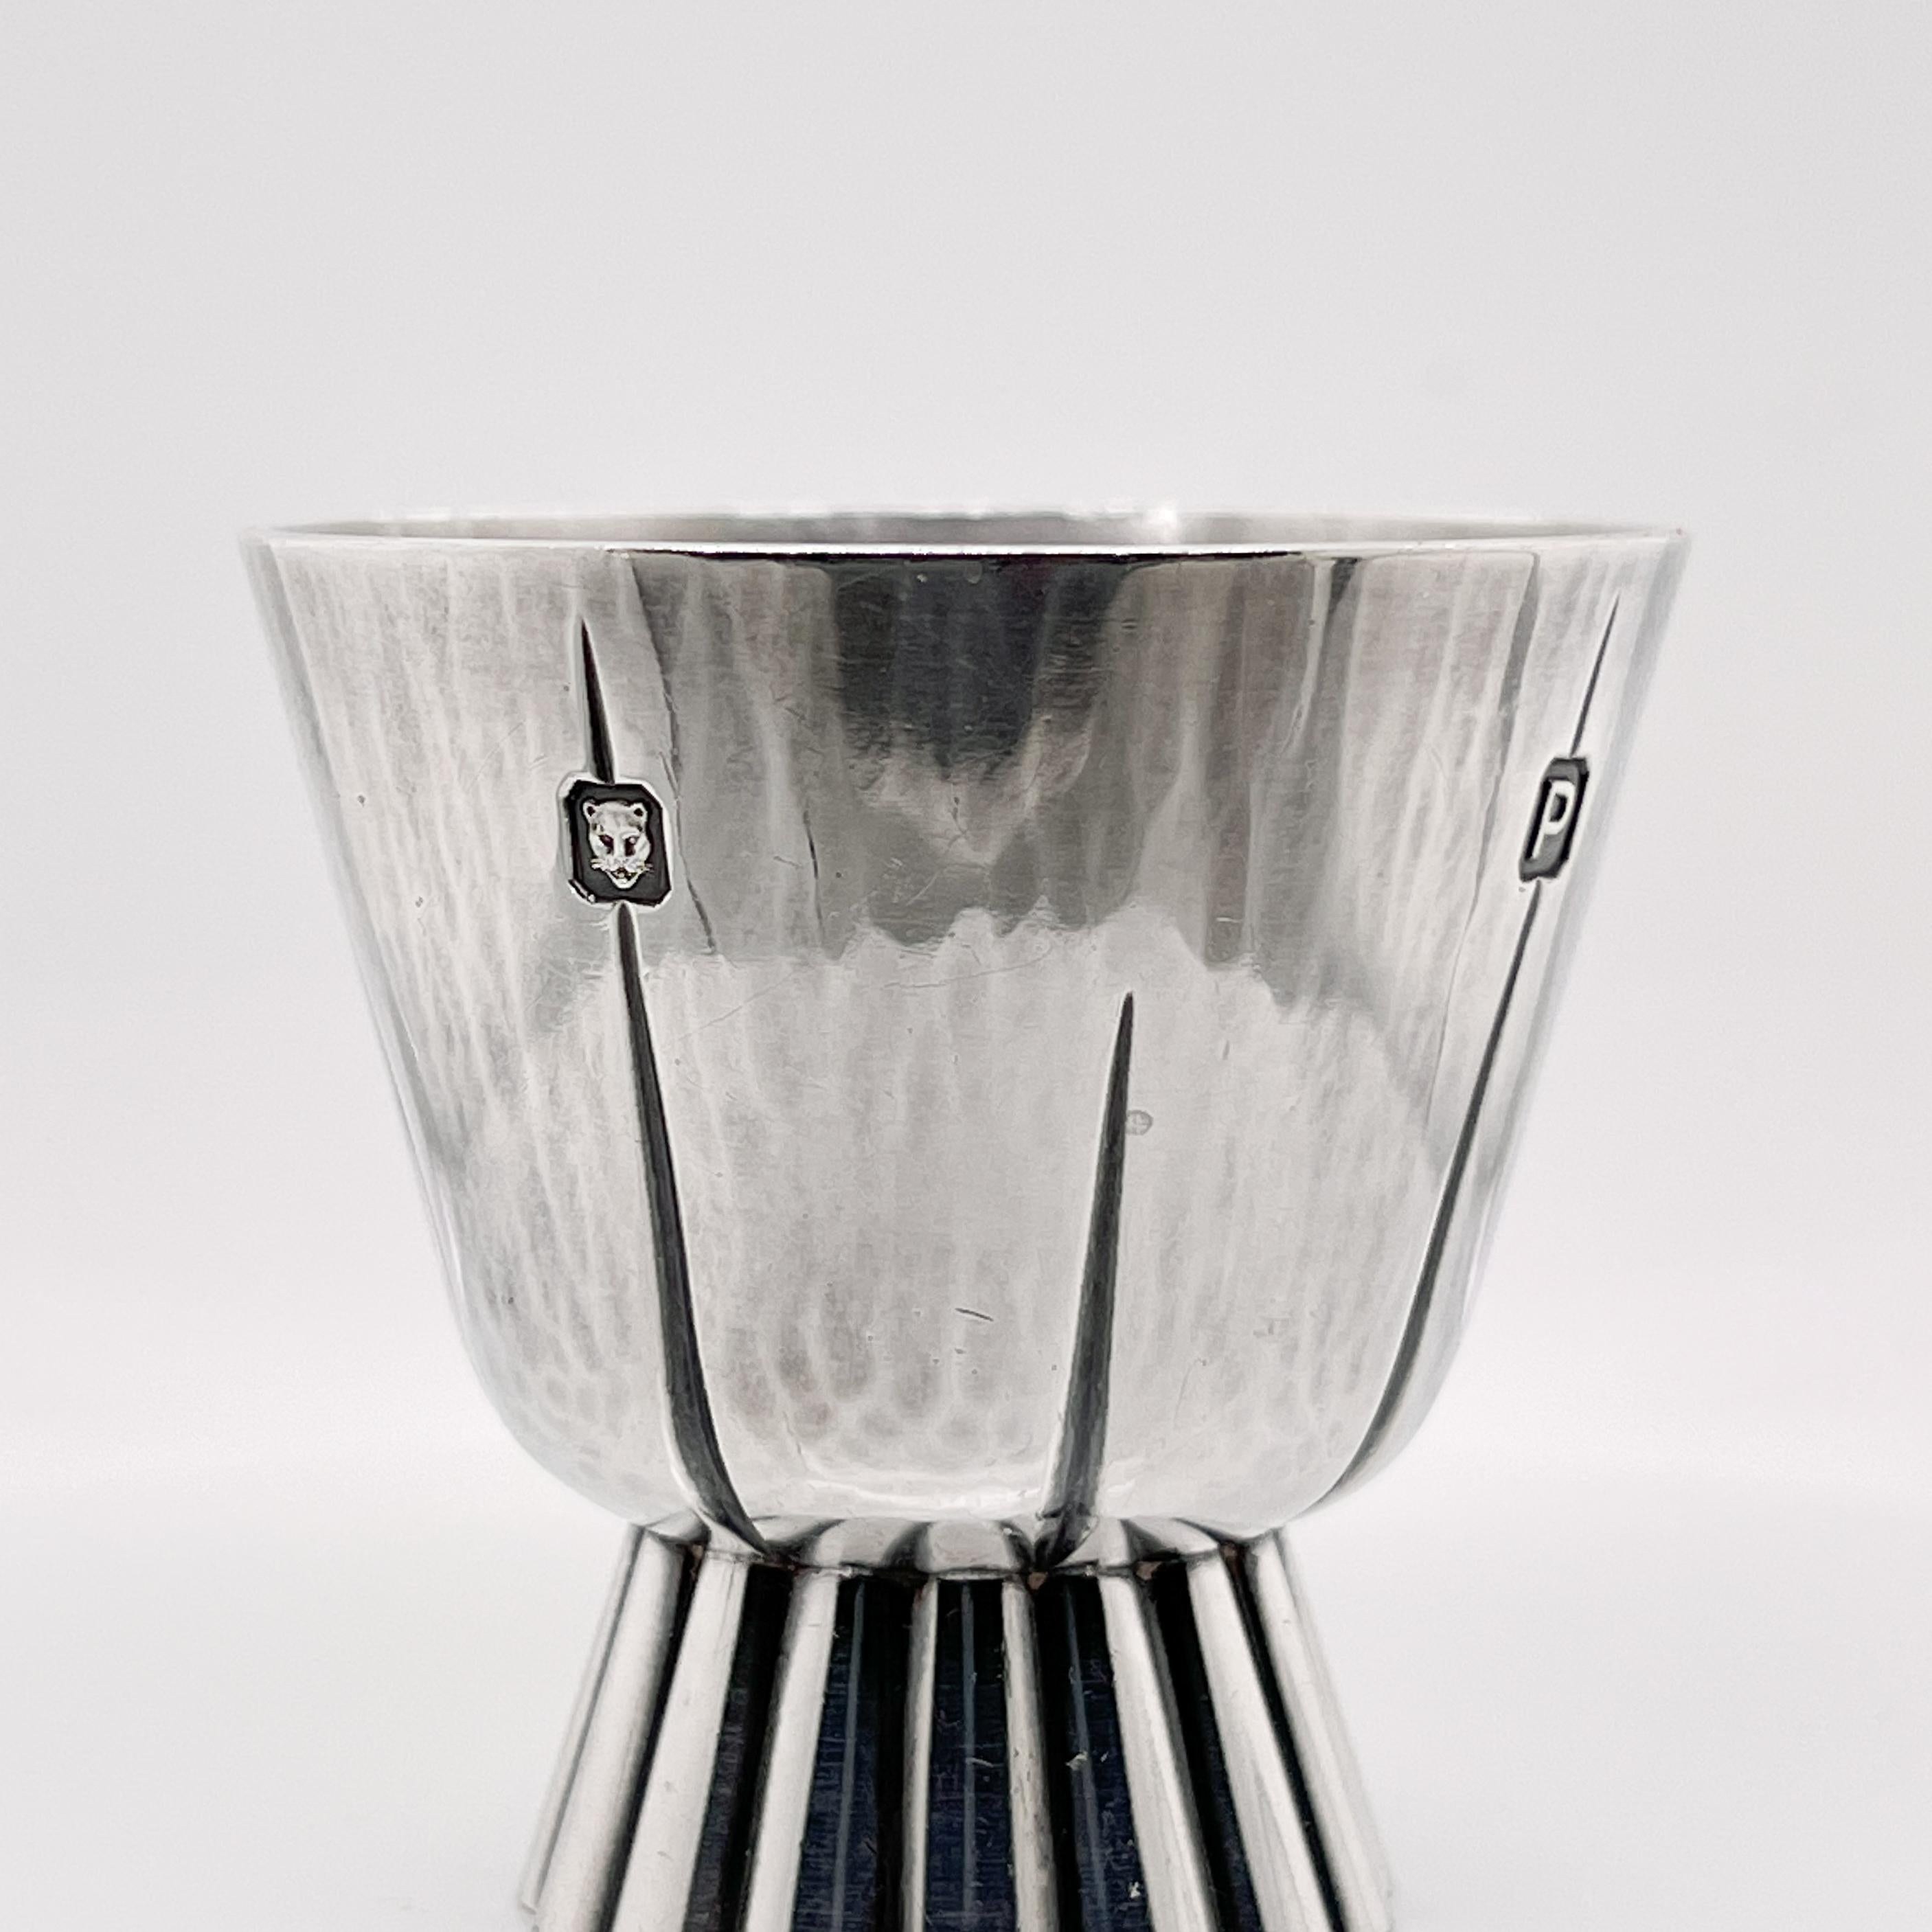 Early English Modernist Gerald Benney Sterling Silver Cordial Cup or Shot Glass For Sale 3